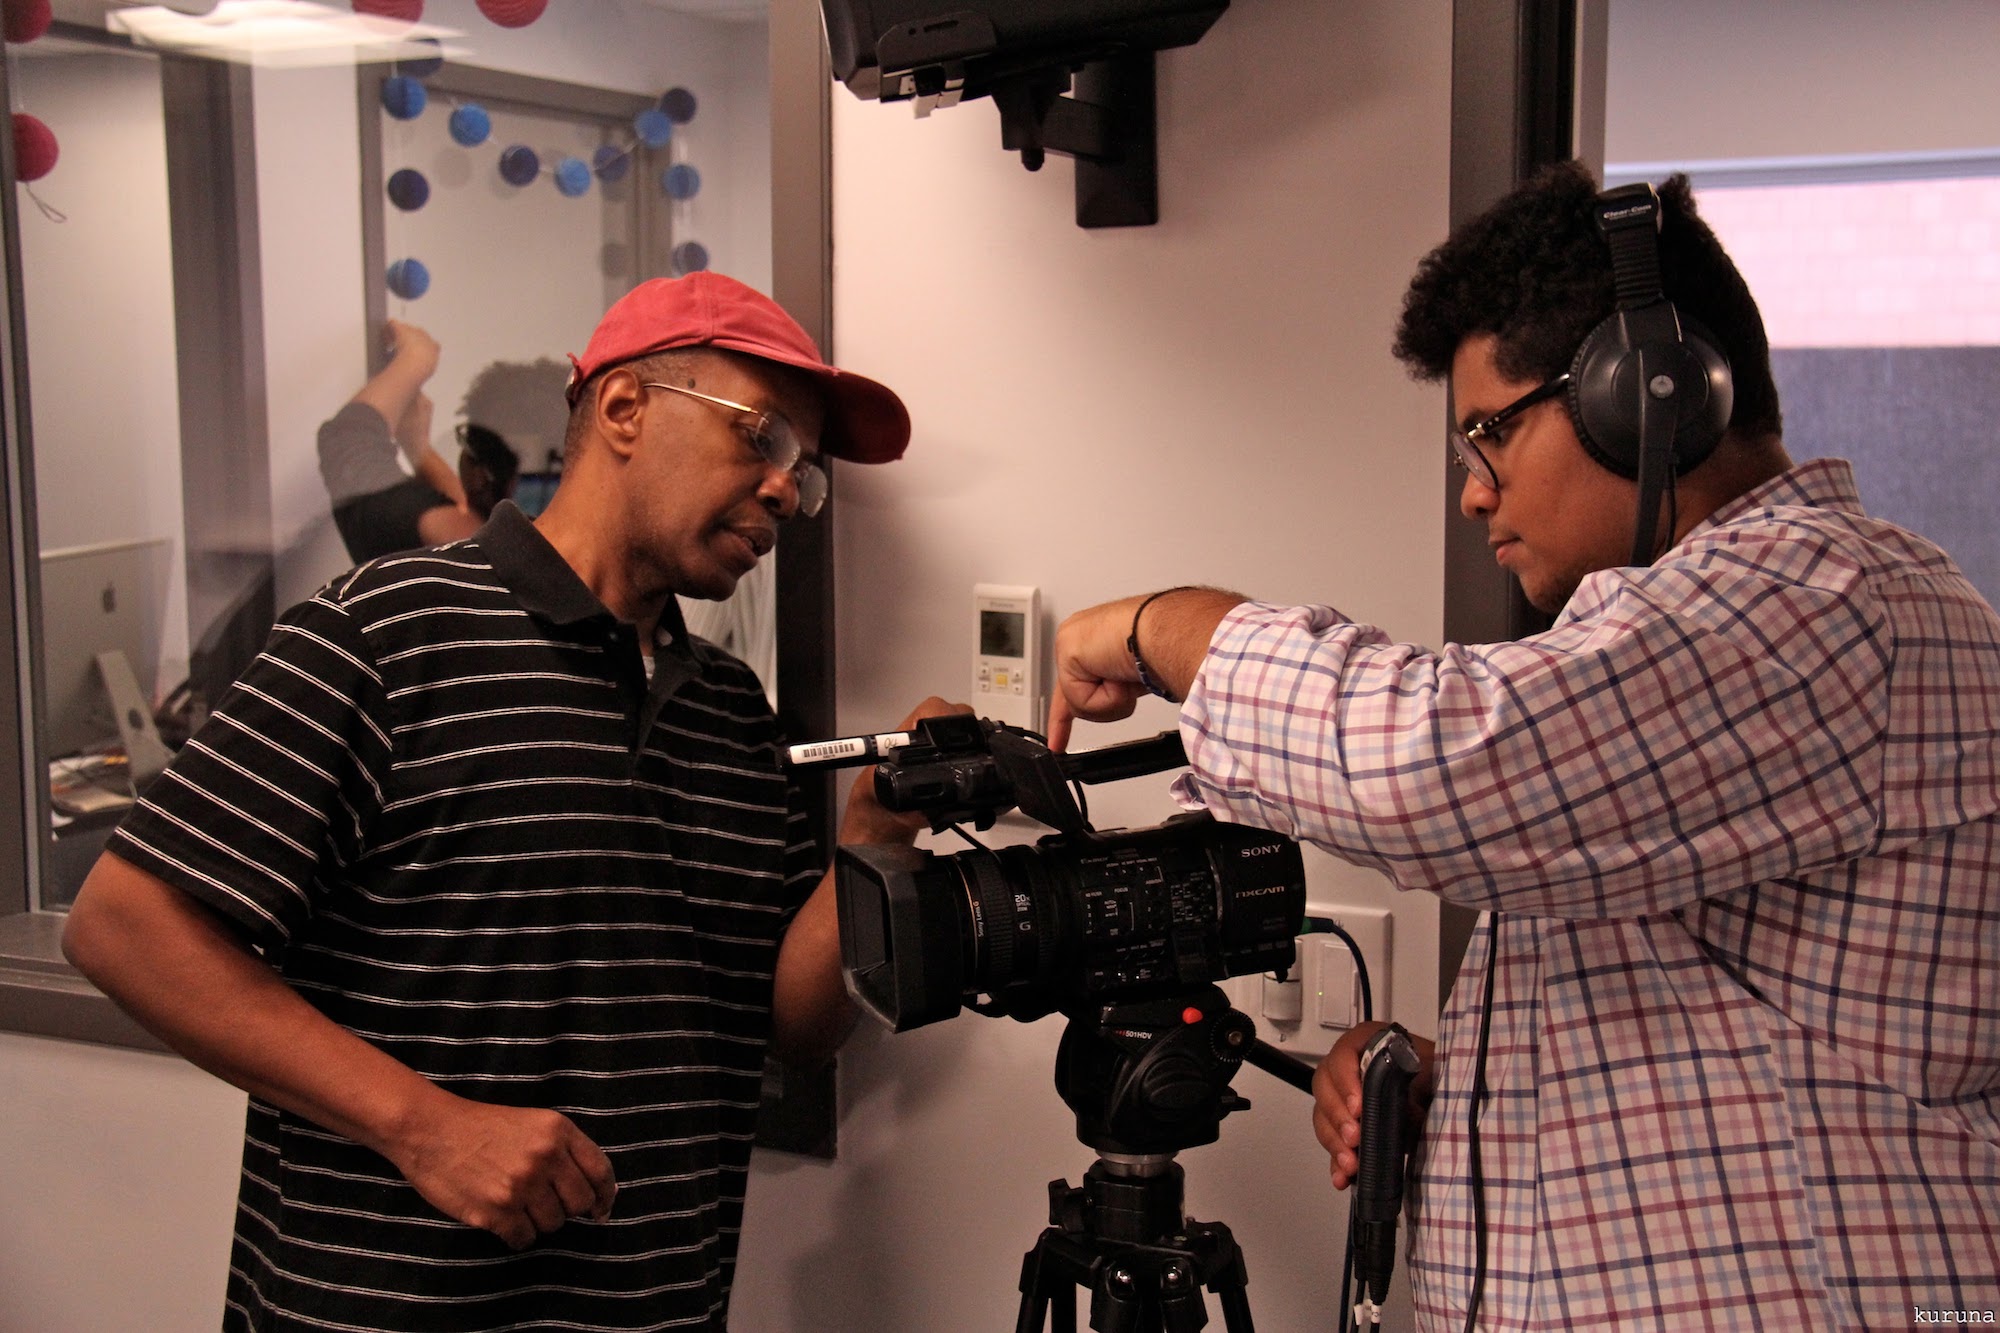 Intern being instructed on video camera recording